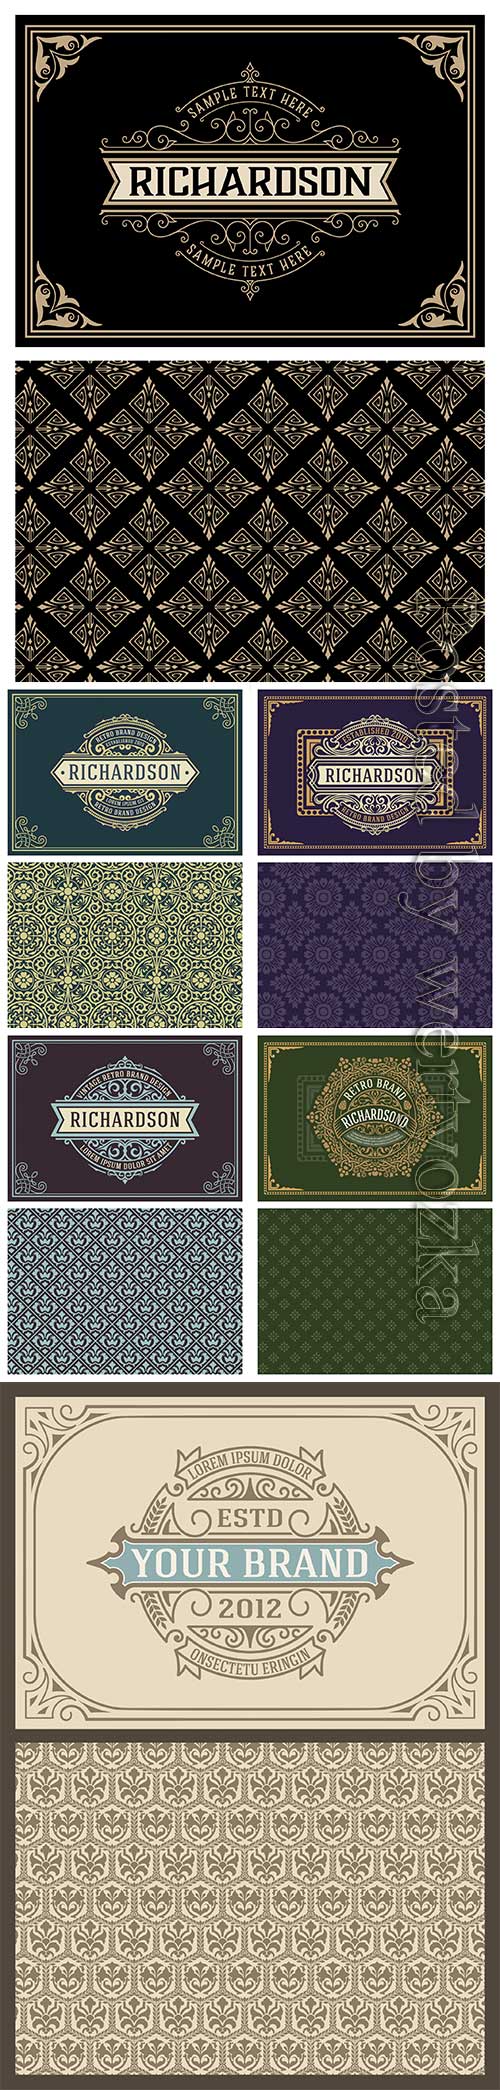 Vintage greeting vector card with ornate swirls and retro background template